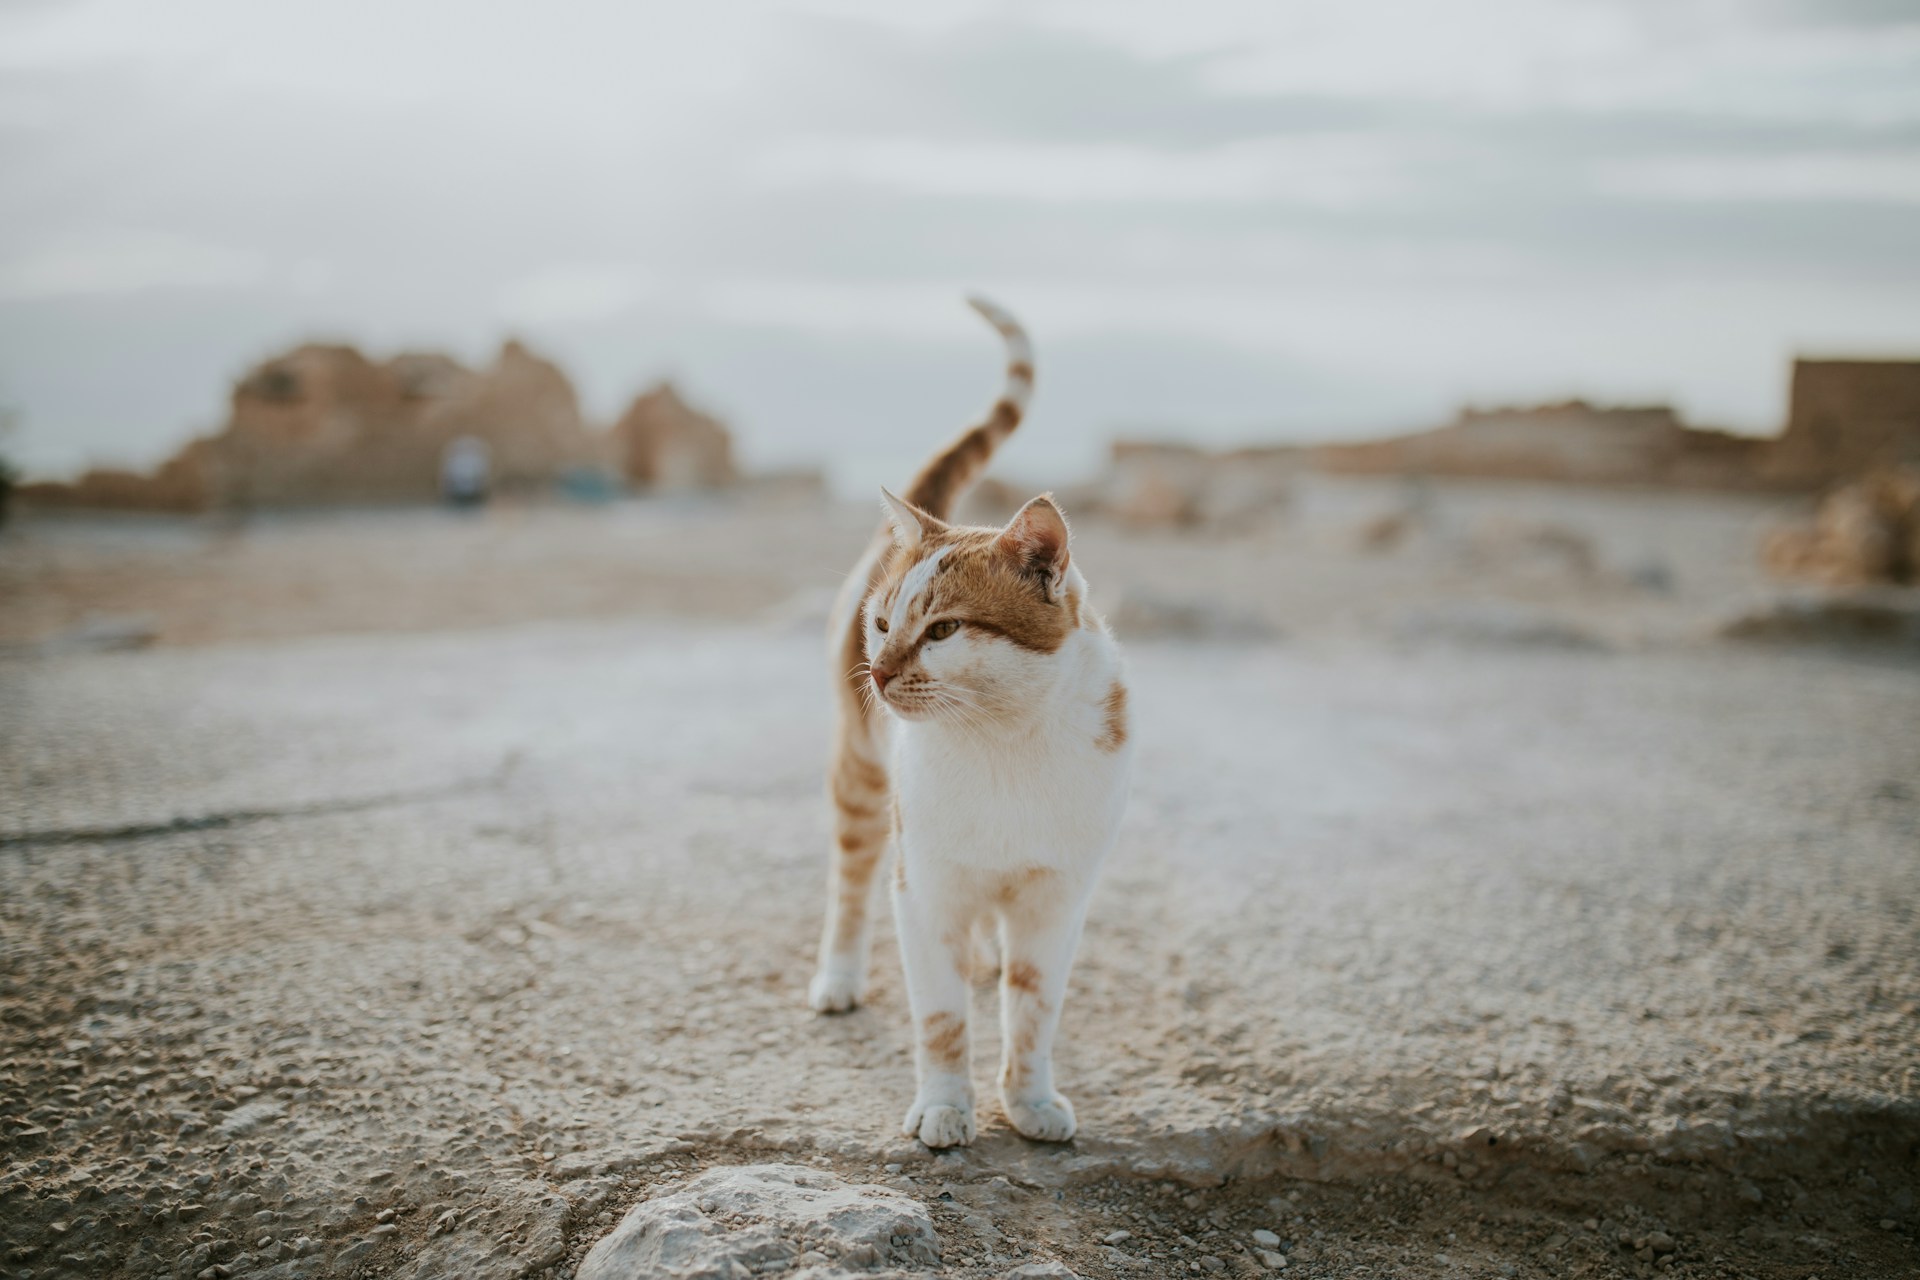 A white and brown cat in a dry region